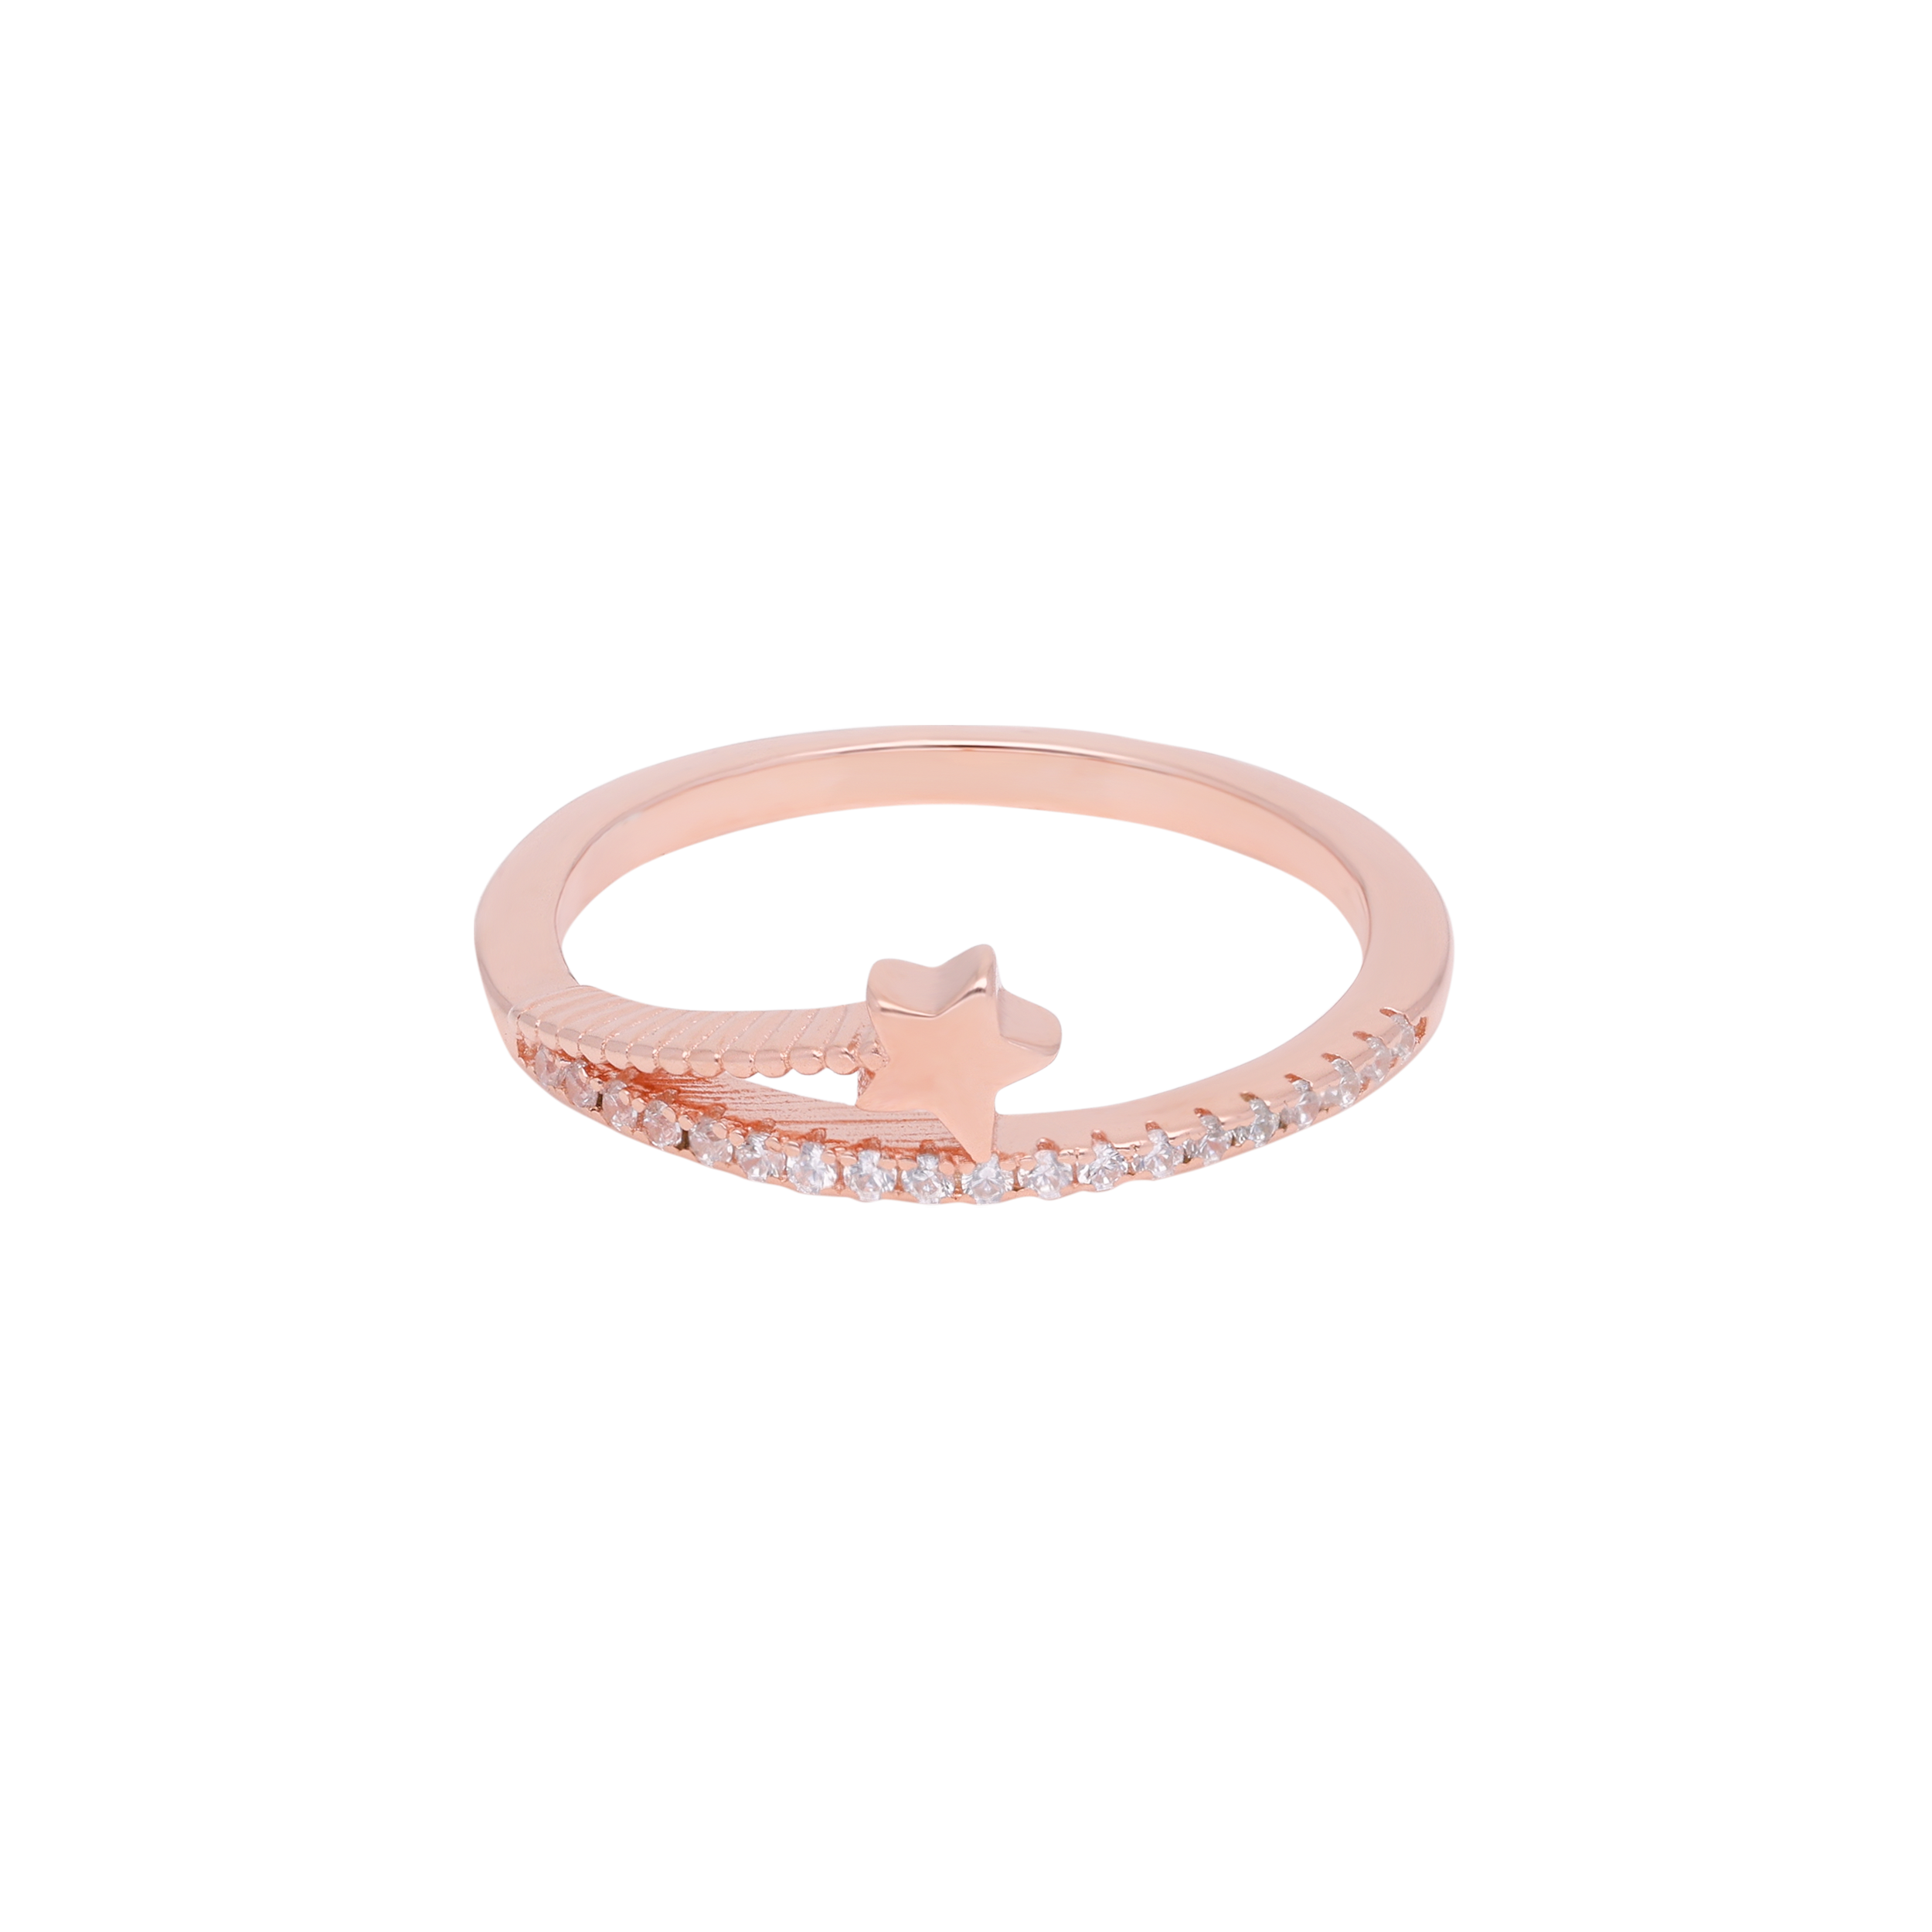 Starry Nights: Sterling Silver Band Ring with Rose Gold Star Design | SKU : 0019799124, 0019799070, 0019799100, 0019799056, 0019799063, 0019799049, 0019799087, 0019799117, 0019799094